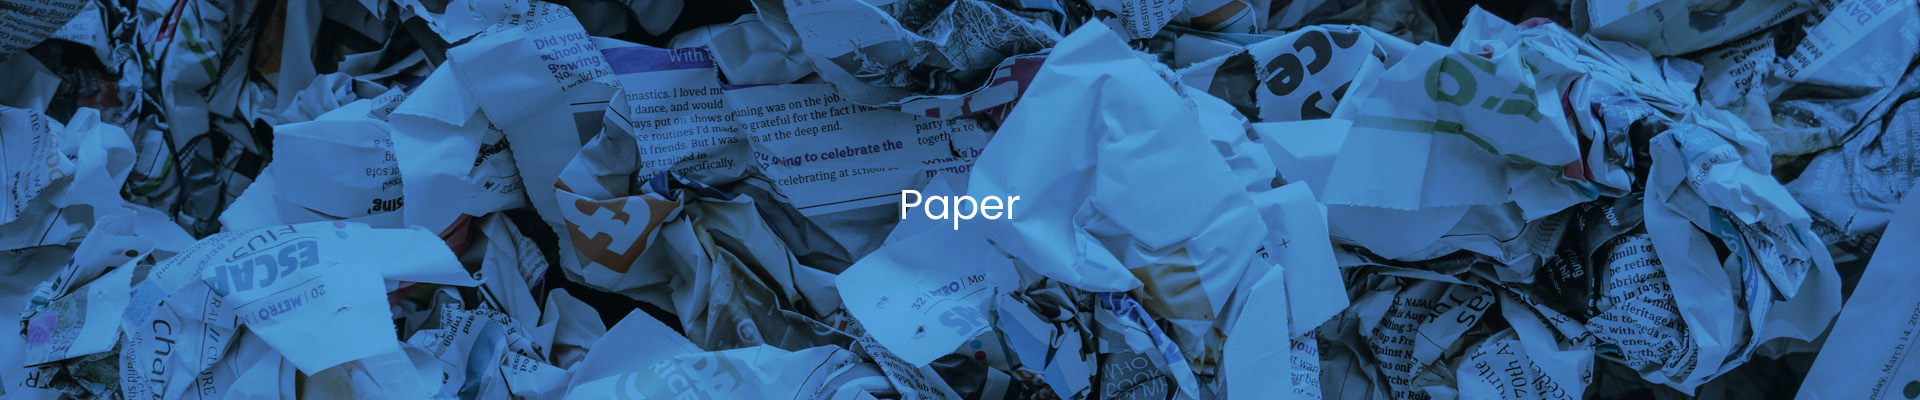 Waste Paper of Recycling